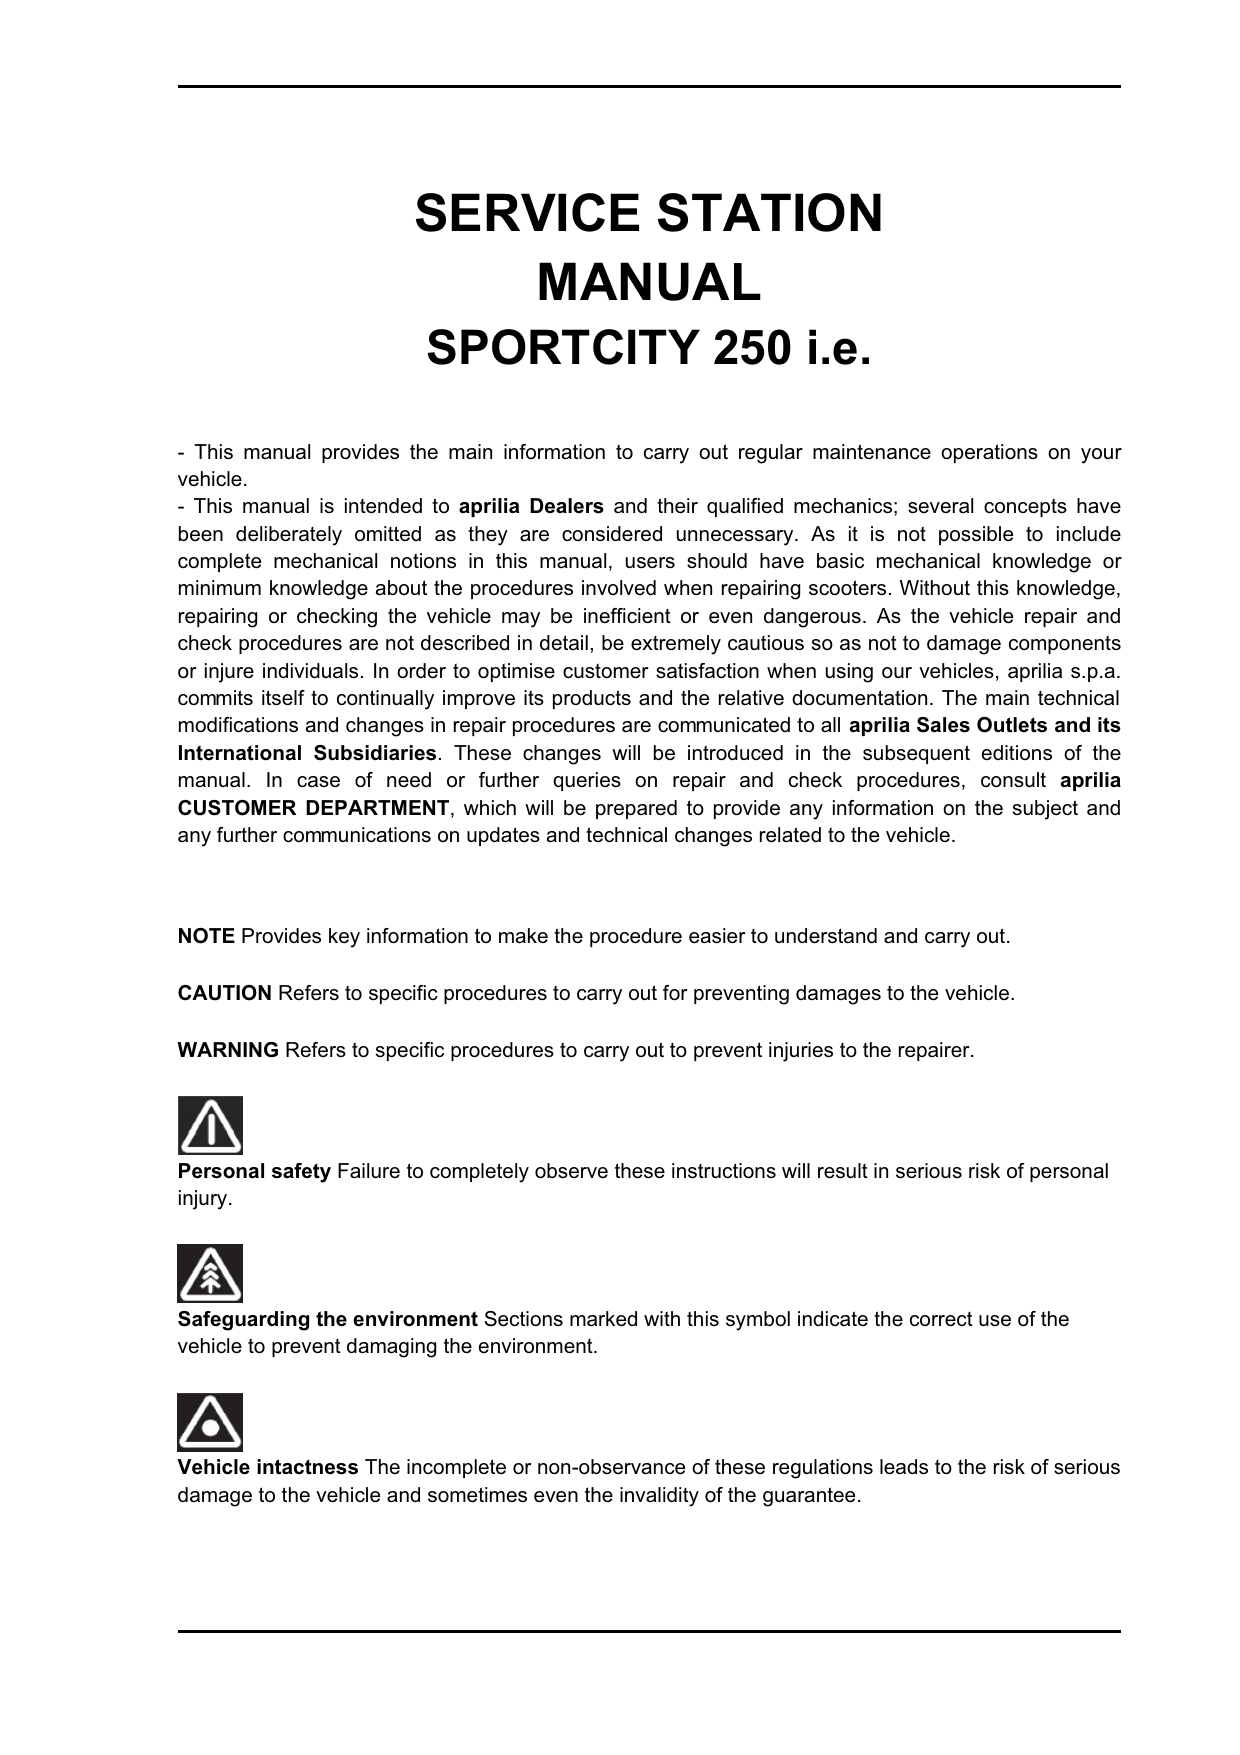 Aprilia Sportcity 250 ie, scooter service station manual Preview image 3